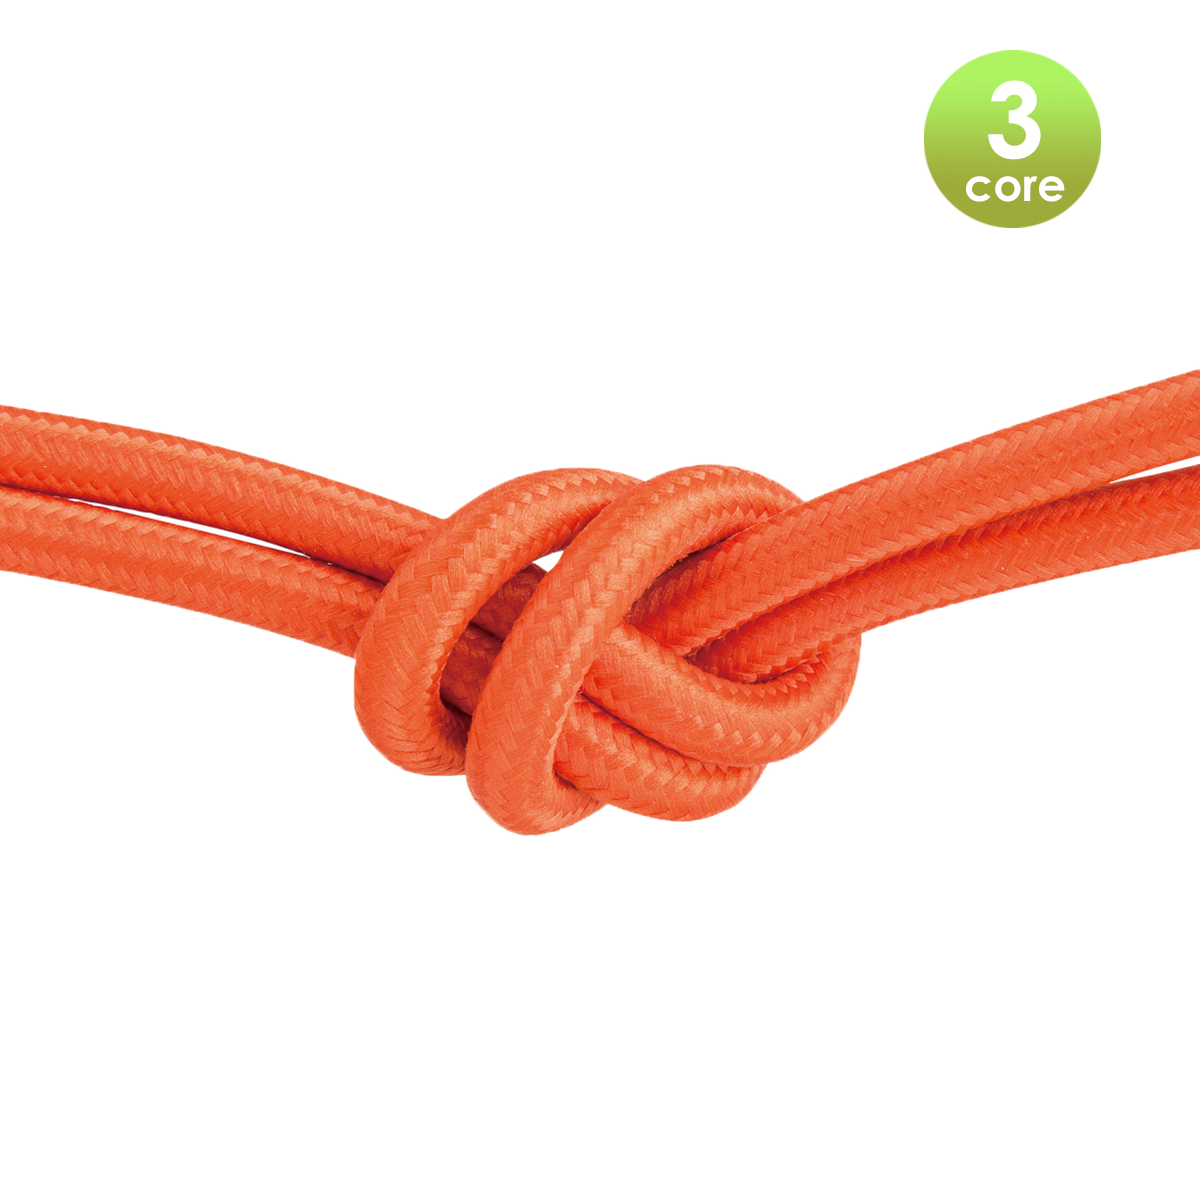 Tangla lighting - TLCB01001OG - 3c - Fabric cable 3 core - in coral red